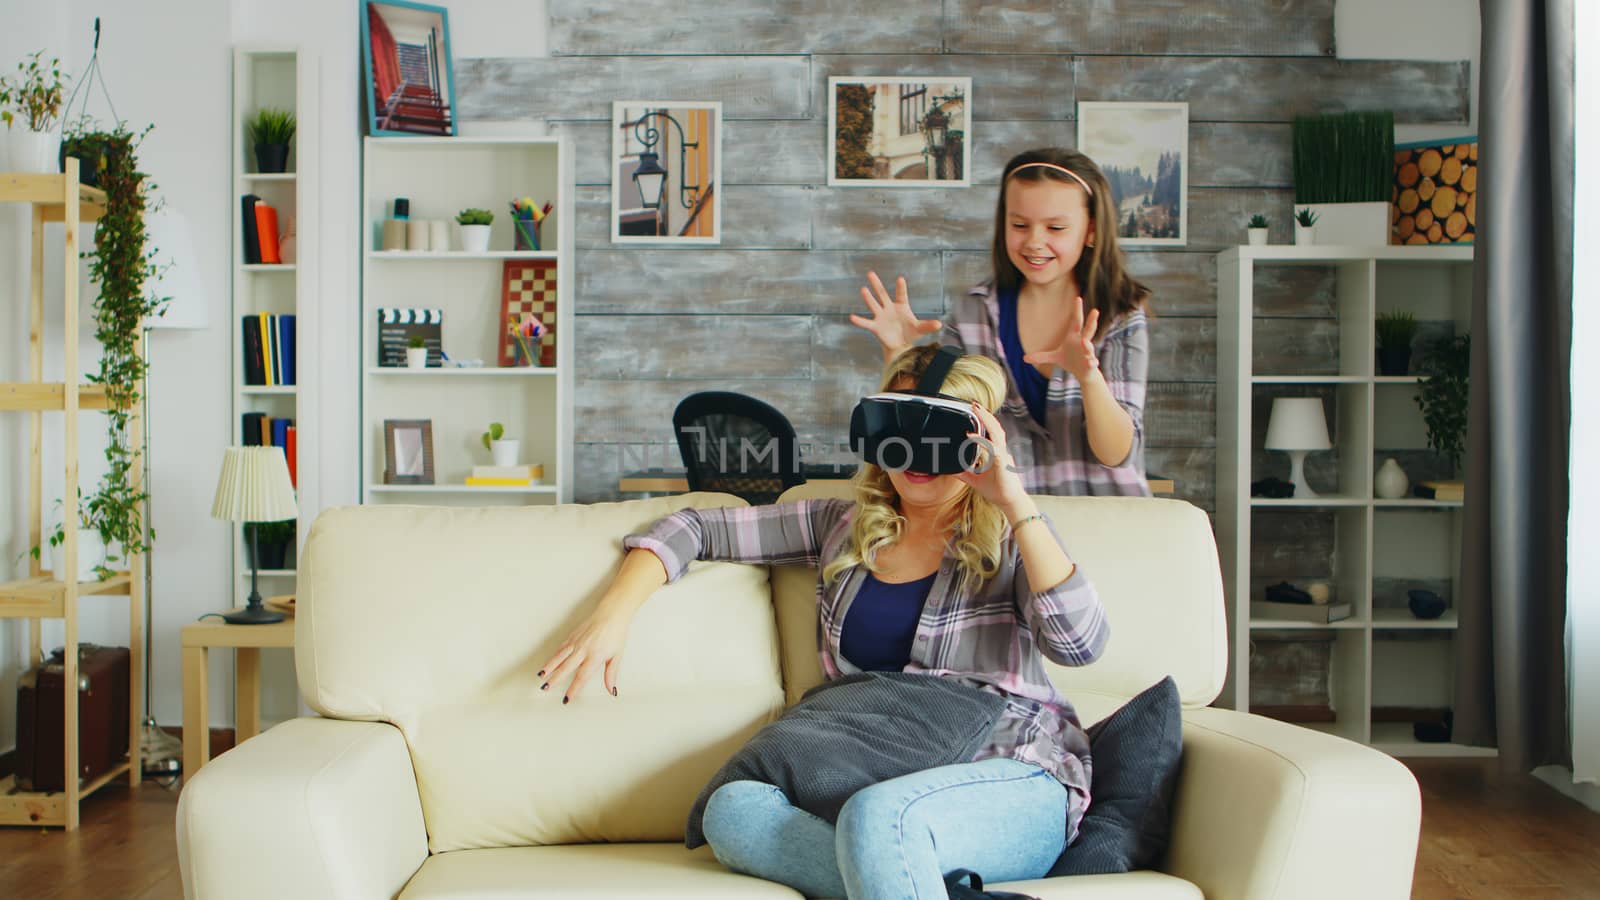 Little girl jumping around her mother while she's using virtual reality headset sitting on the couch.